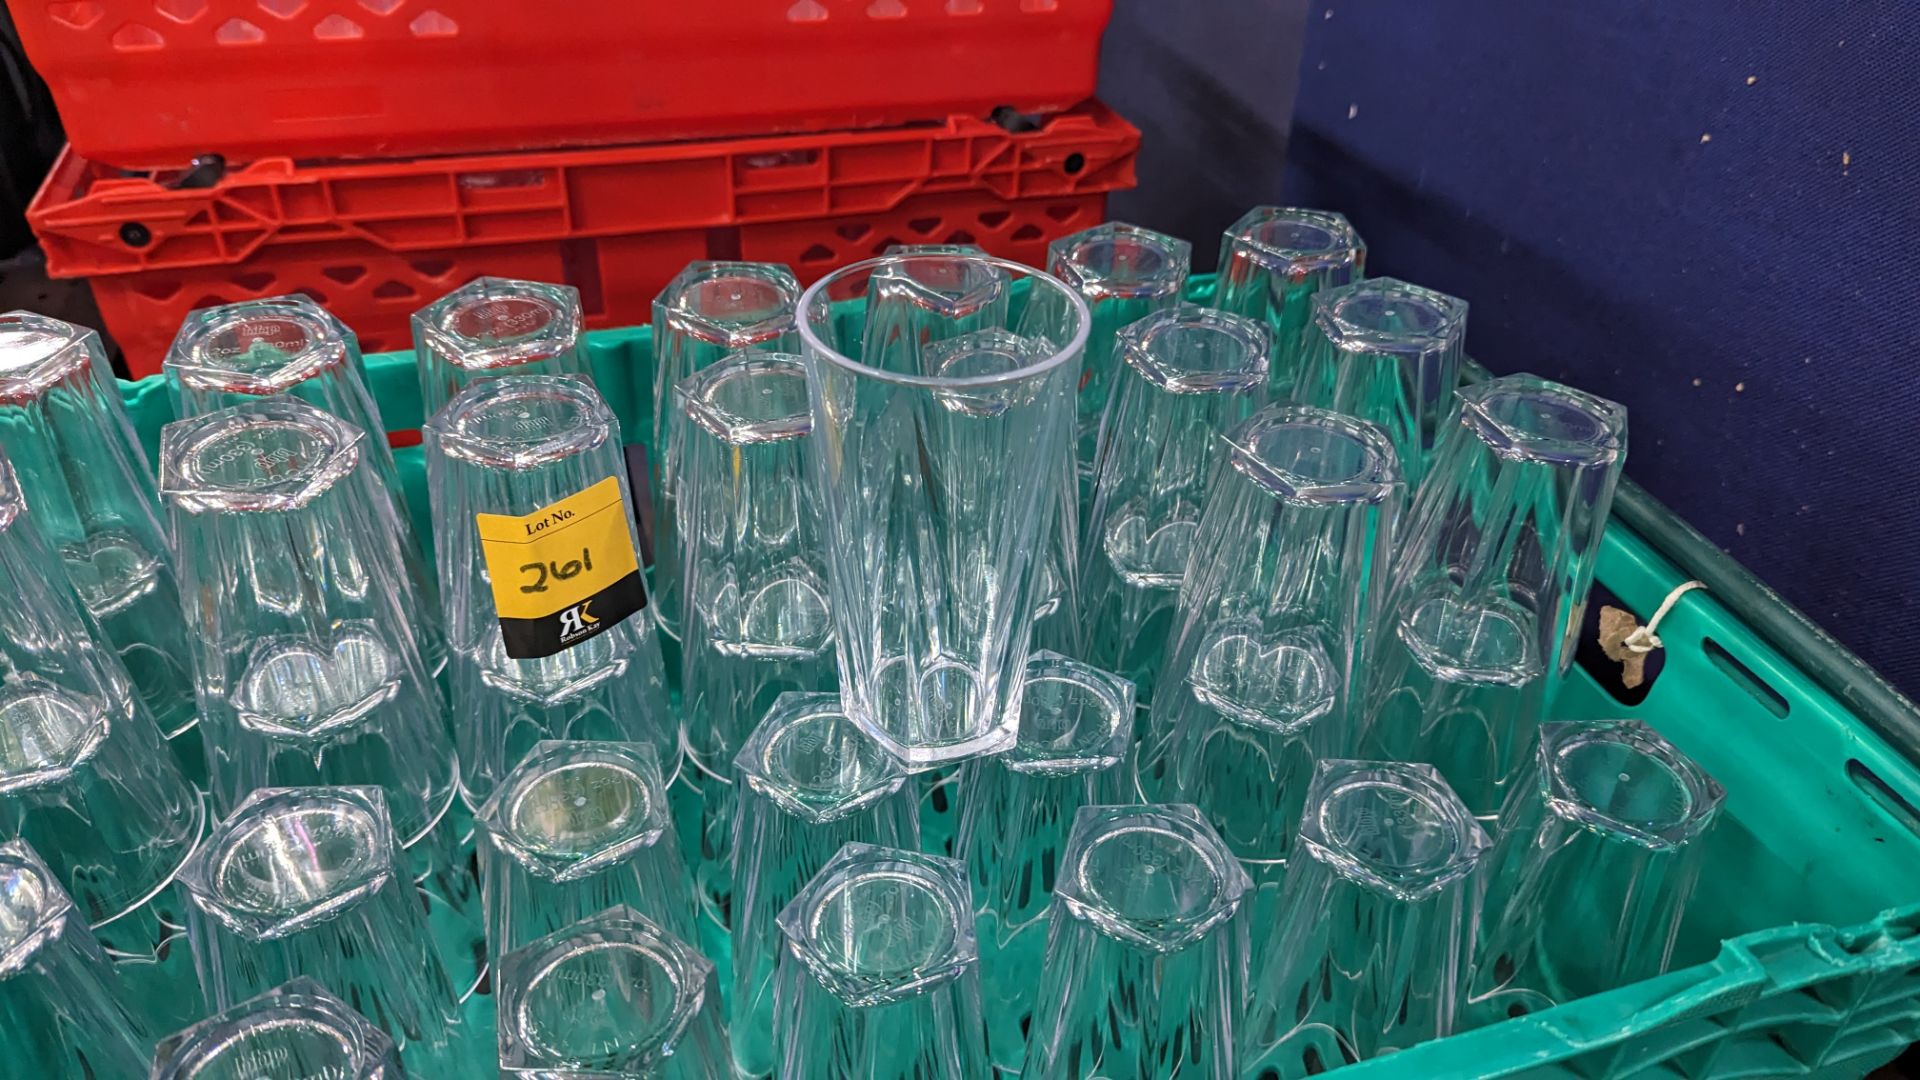 100 off plastic reusable tumblers - the contents of 3 crates - Image 6 of 7